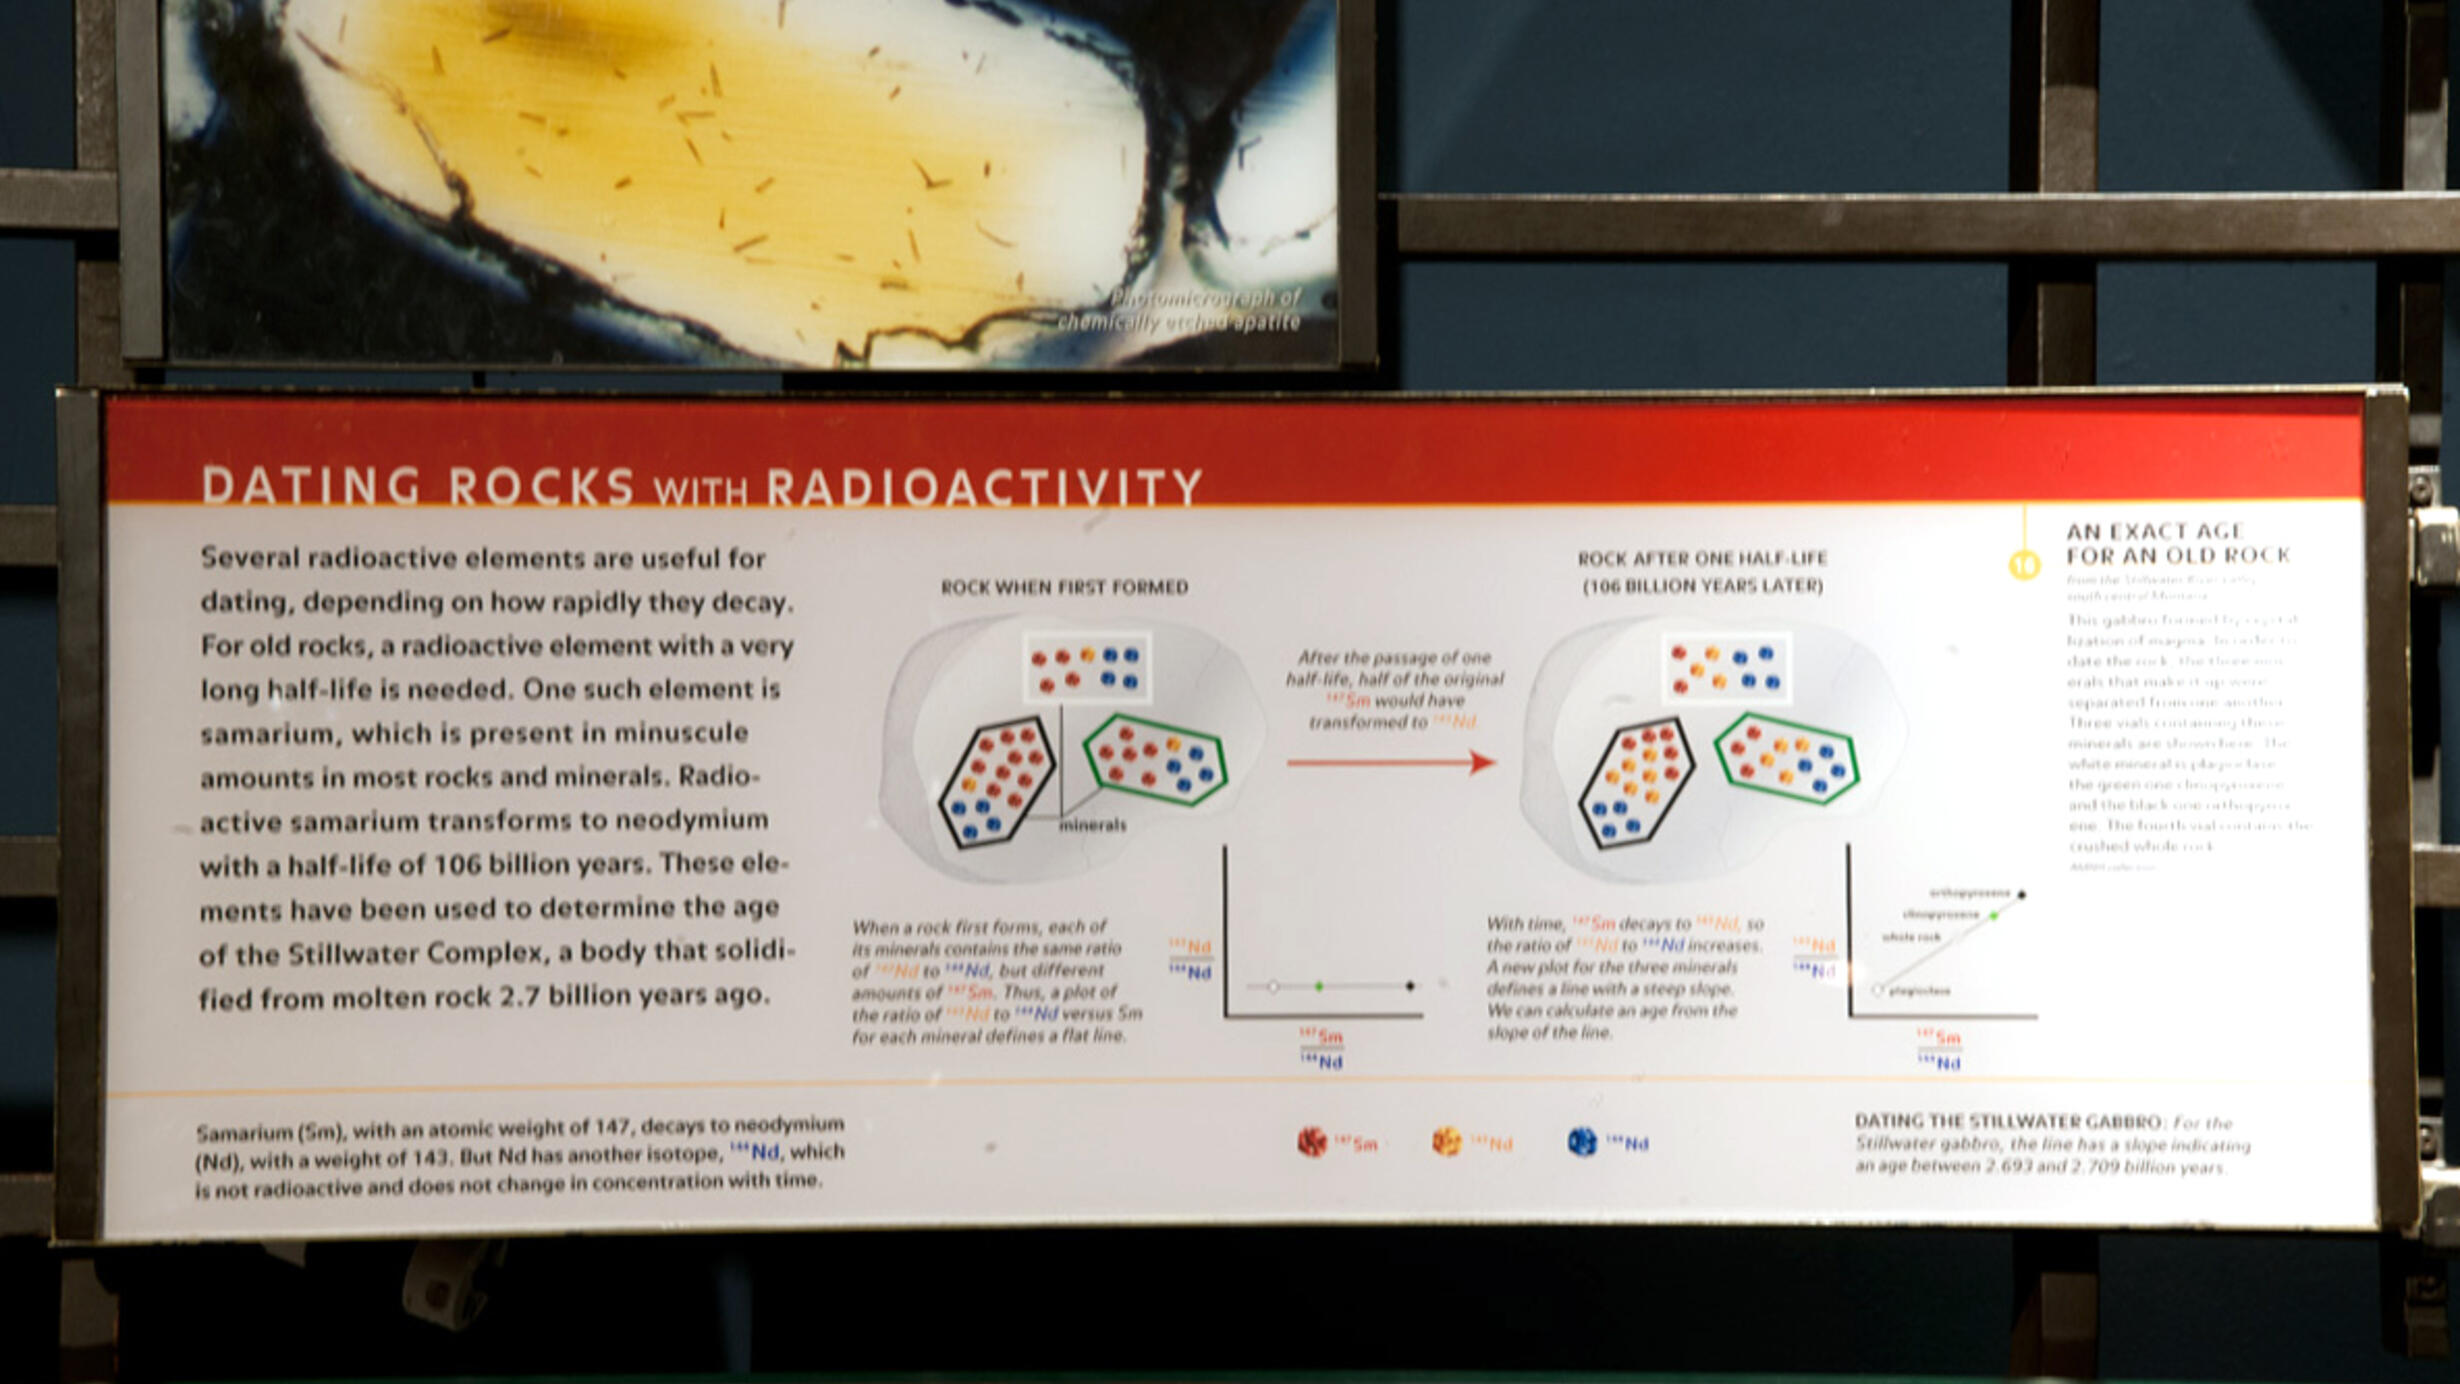 Several rock specimens and explanation signs about dating rocks and radioactivity.